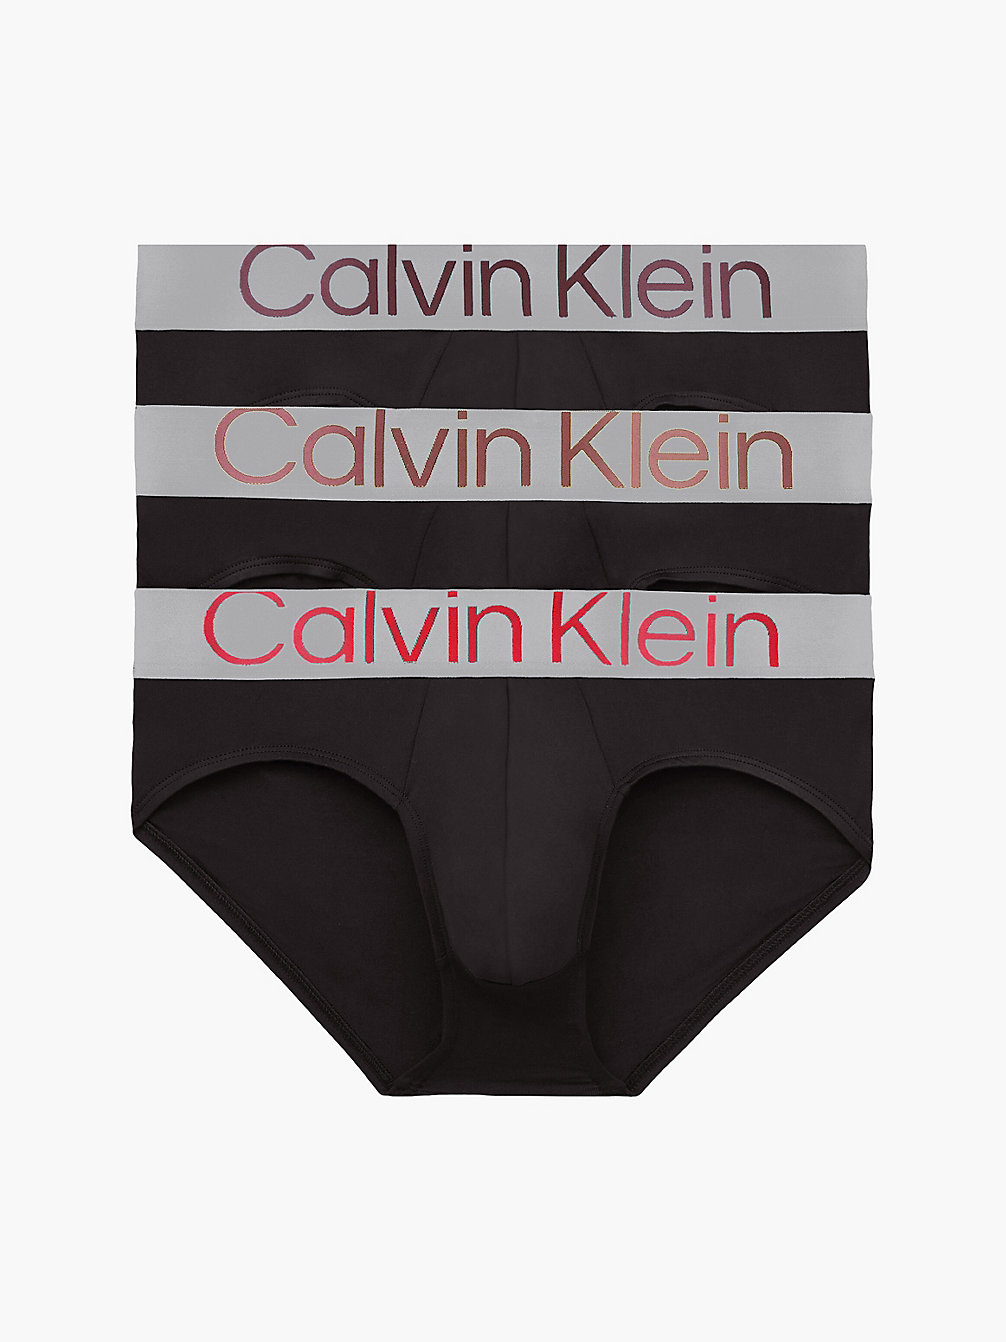 B-ORNG ODSY/ DUSTY CPPR/ RHONE LOGO 3-Pack Slips - Steel Micro undefined heren Calvin Klein